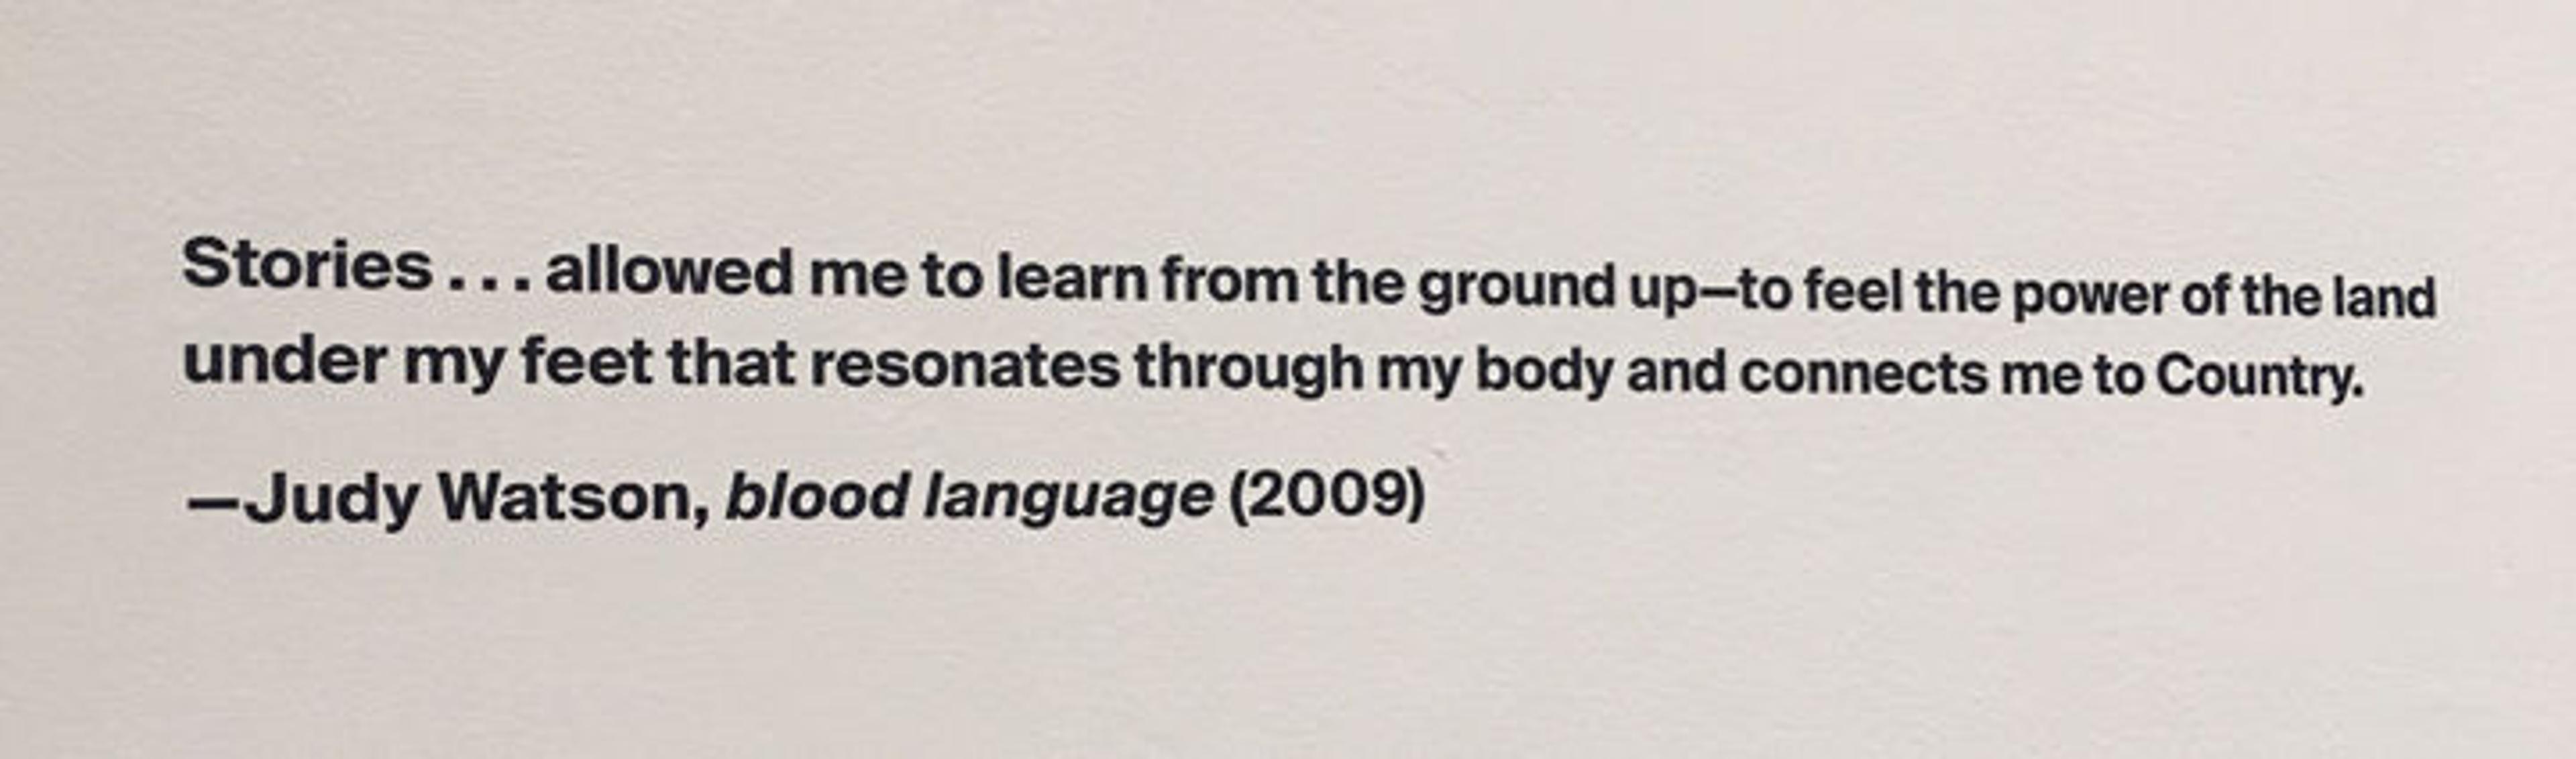 Stories . . . allowed me to learn from the ground up—to feel the power of the land under my feet that resonates through my body and connects me to Country. —Judy Watson, blood language (2009)